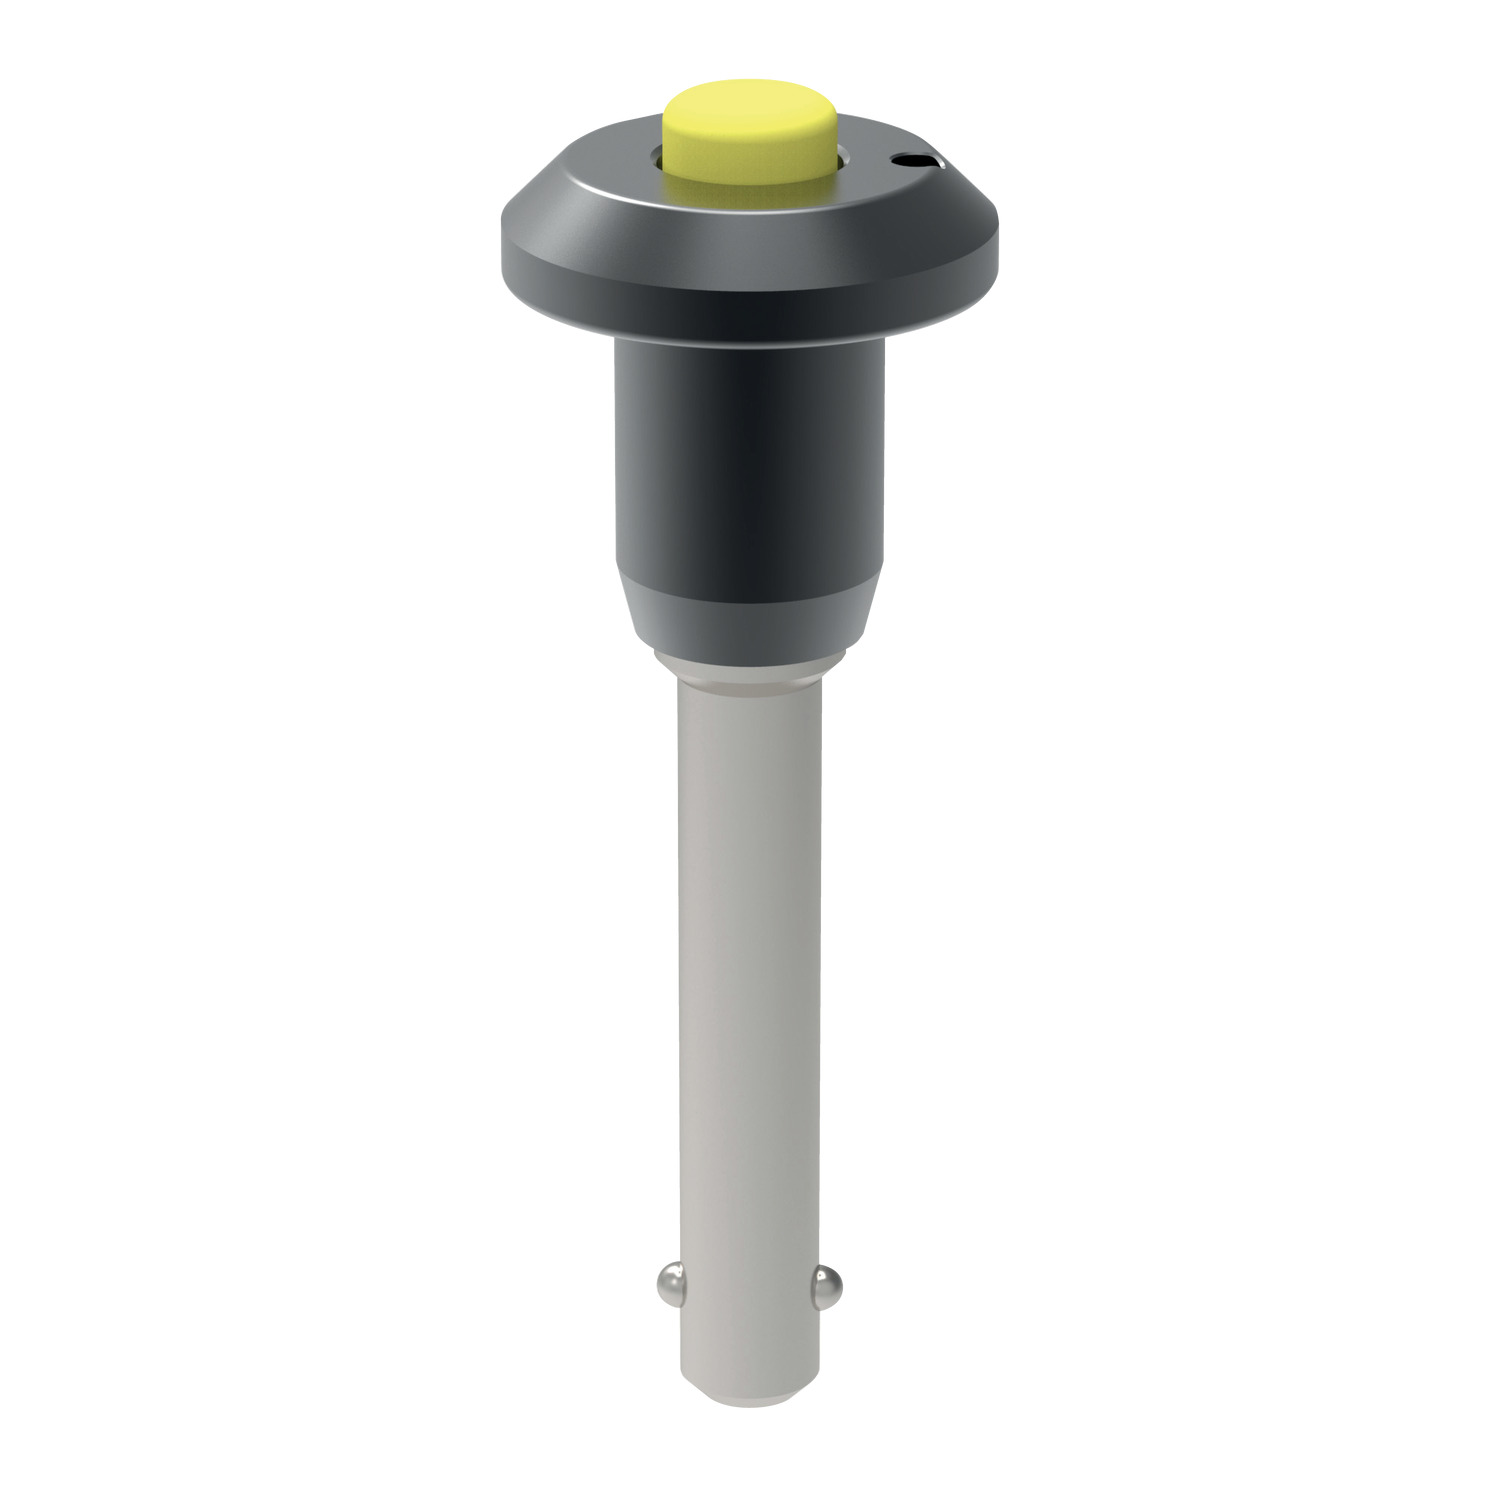 Clamp Lock Pins - Single Acting Ball lock pin with a high-visibility yellow push-button to act as a visual reminder to avoid knocking or bumping equipment. Available in stainless steel AISI 303 series or the extra strong AISI 630 series.